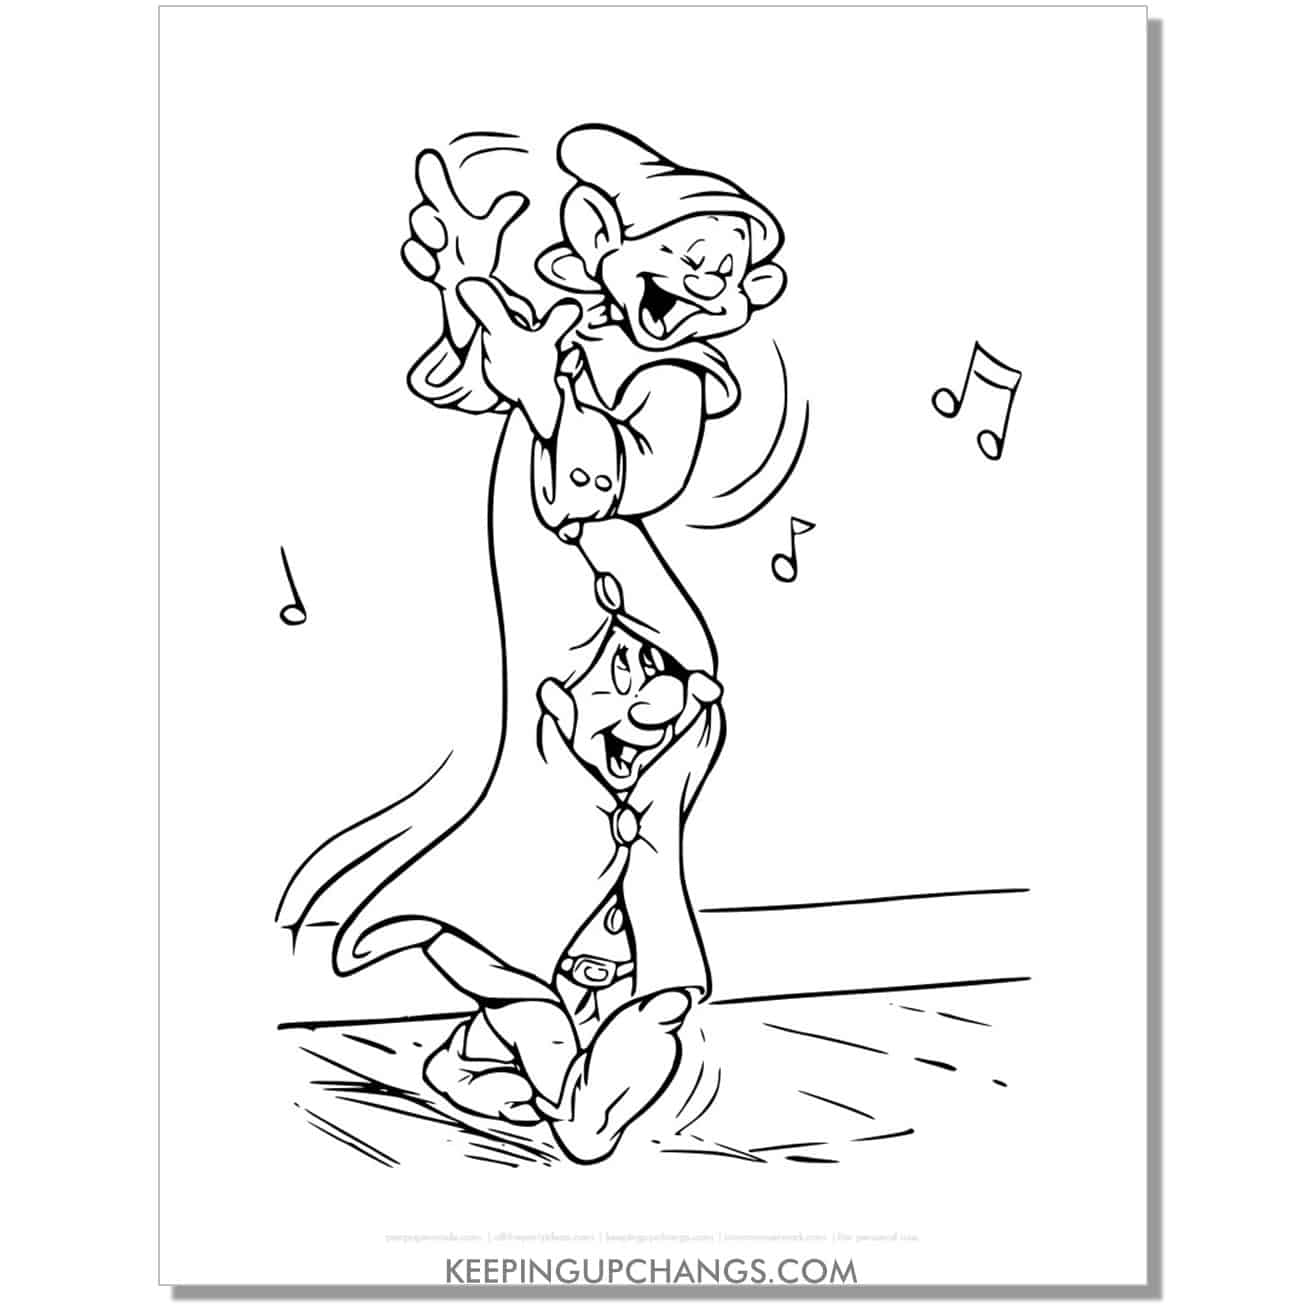 snow white dopey and bashful coloring page, sheet.